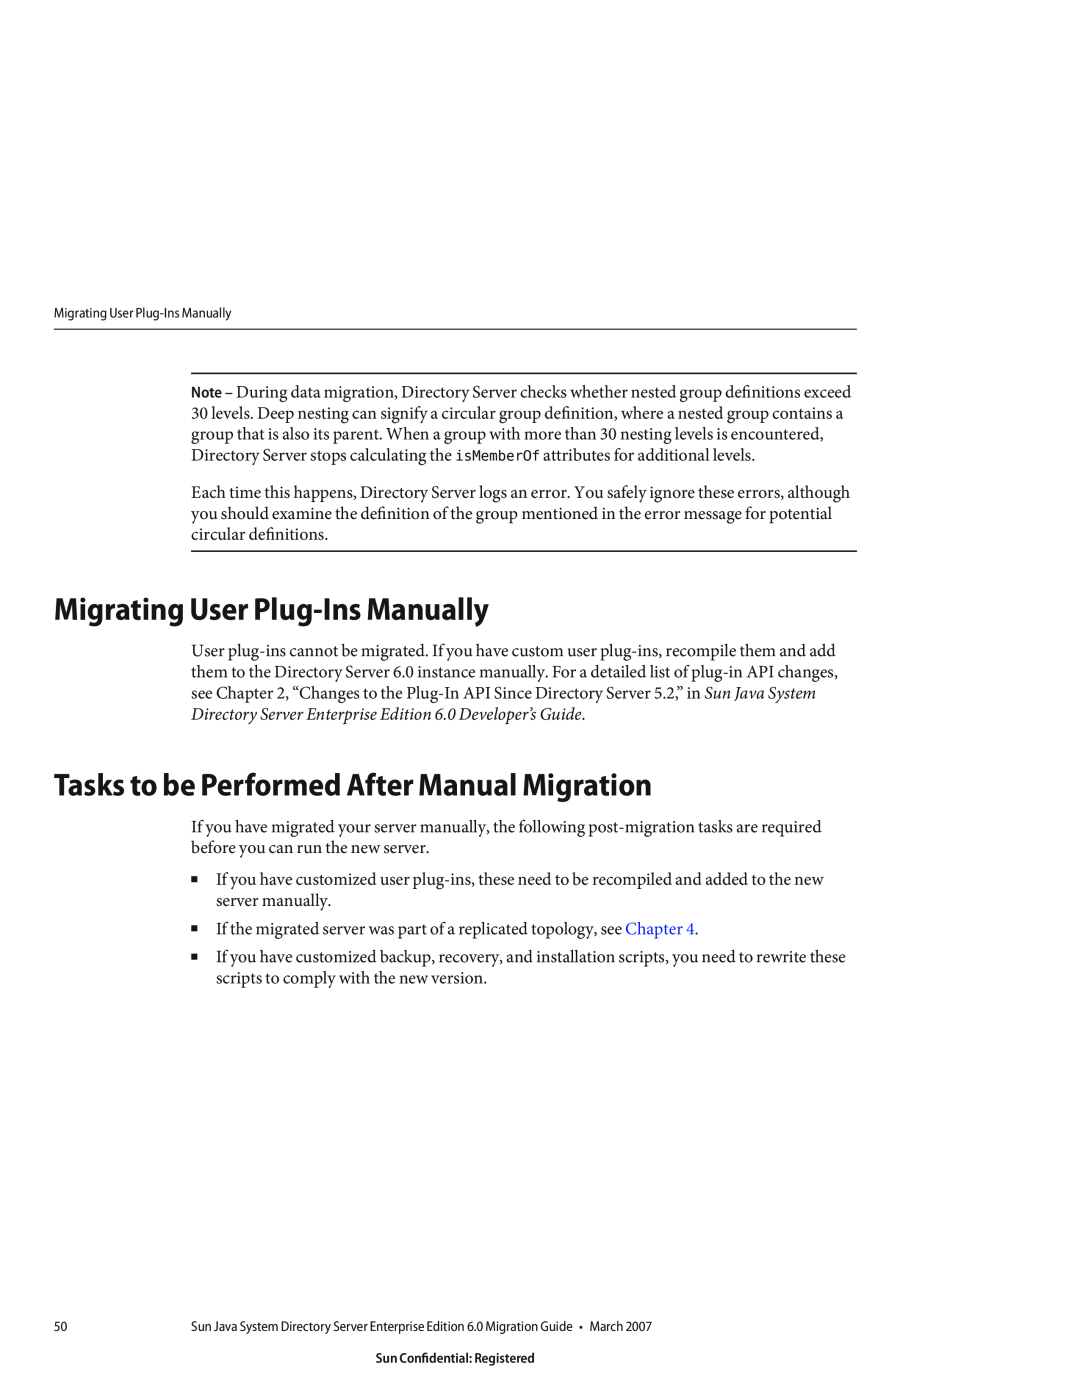 Sun Microsystems 8190994 manual Migrating User Plug-Ins Manually, Tasks to be Performed After Manual Migration 